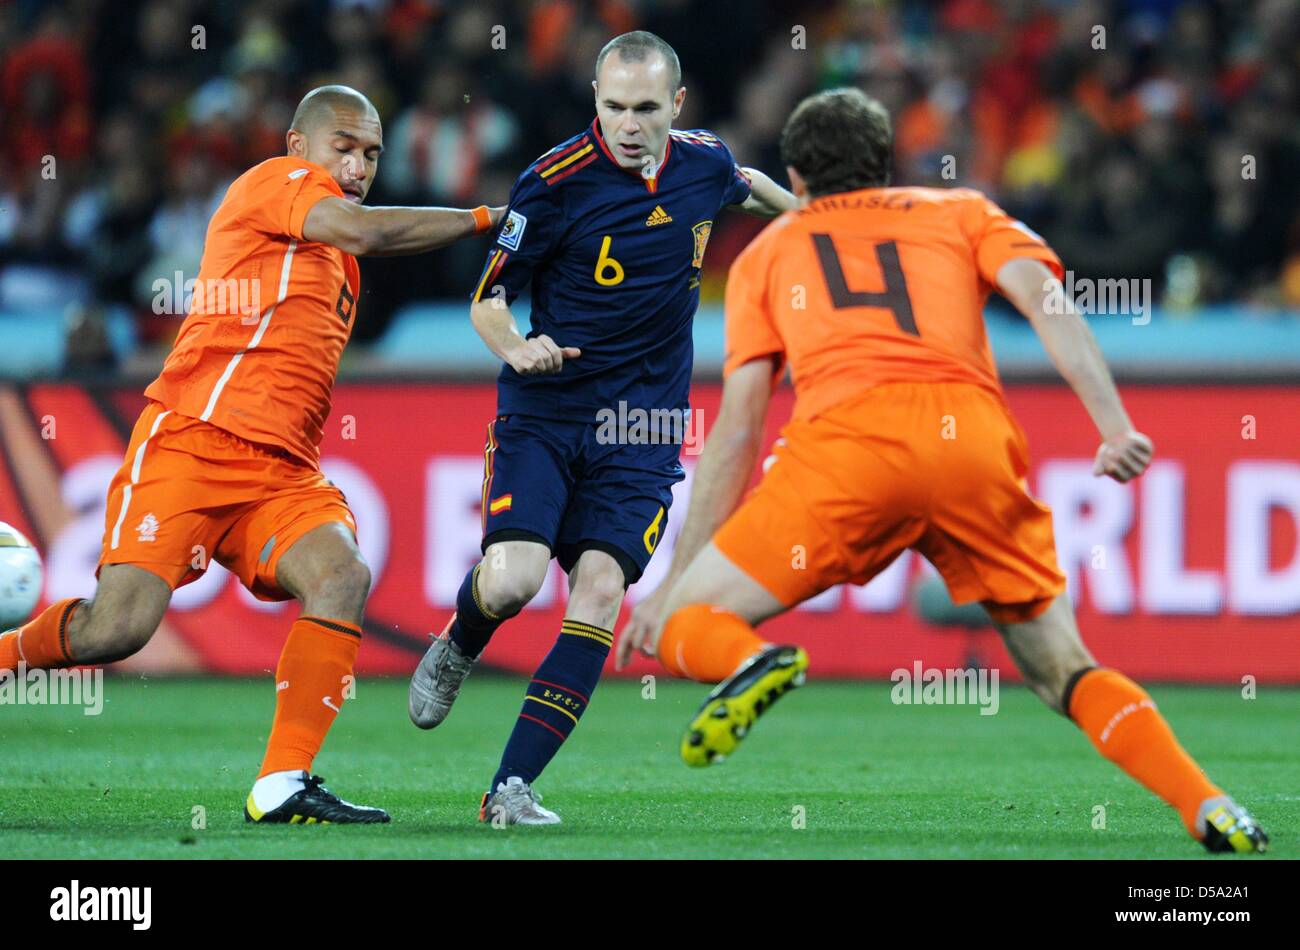 Andres Iniesta (C) of Spain vies with Nigel de Jong (L) and Joris Mathijsen (R) of the Netherlands during the 2010 FIFA World Cup final match between the Netherlands and Spain at the Soccer City Stadium in Johannesburg, South Africa 11 July 2010. Photo: Bernd Weissbrod dpa - Please refer to http://dpaq.de/FIFA-WM2010-TC  +++(c) dpa - Bildfunk+++ Stock Photo